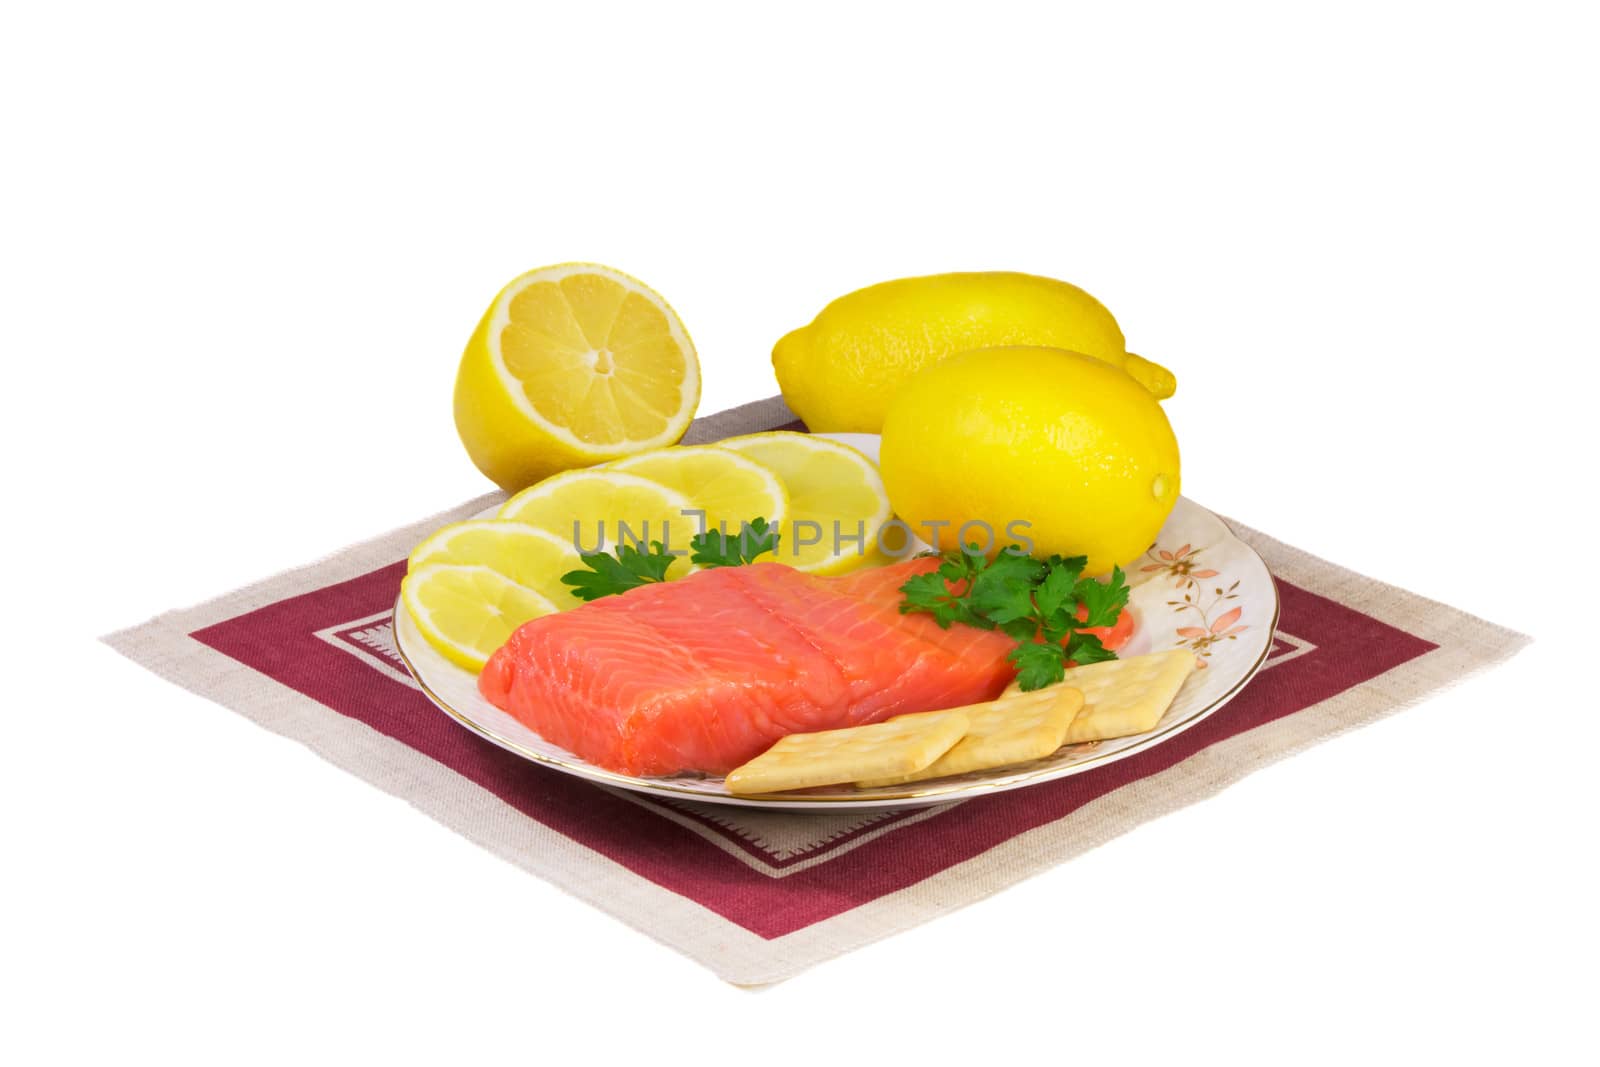 Salmon fillet and lemons on a platter on a white background. by georgina198